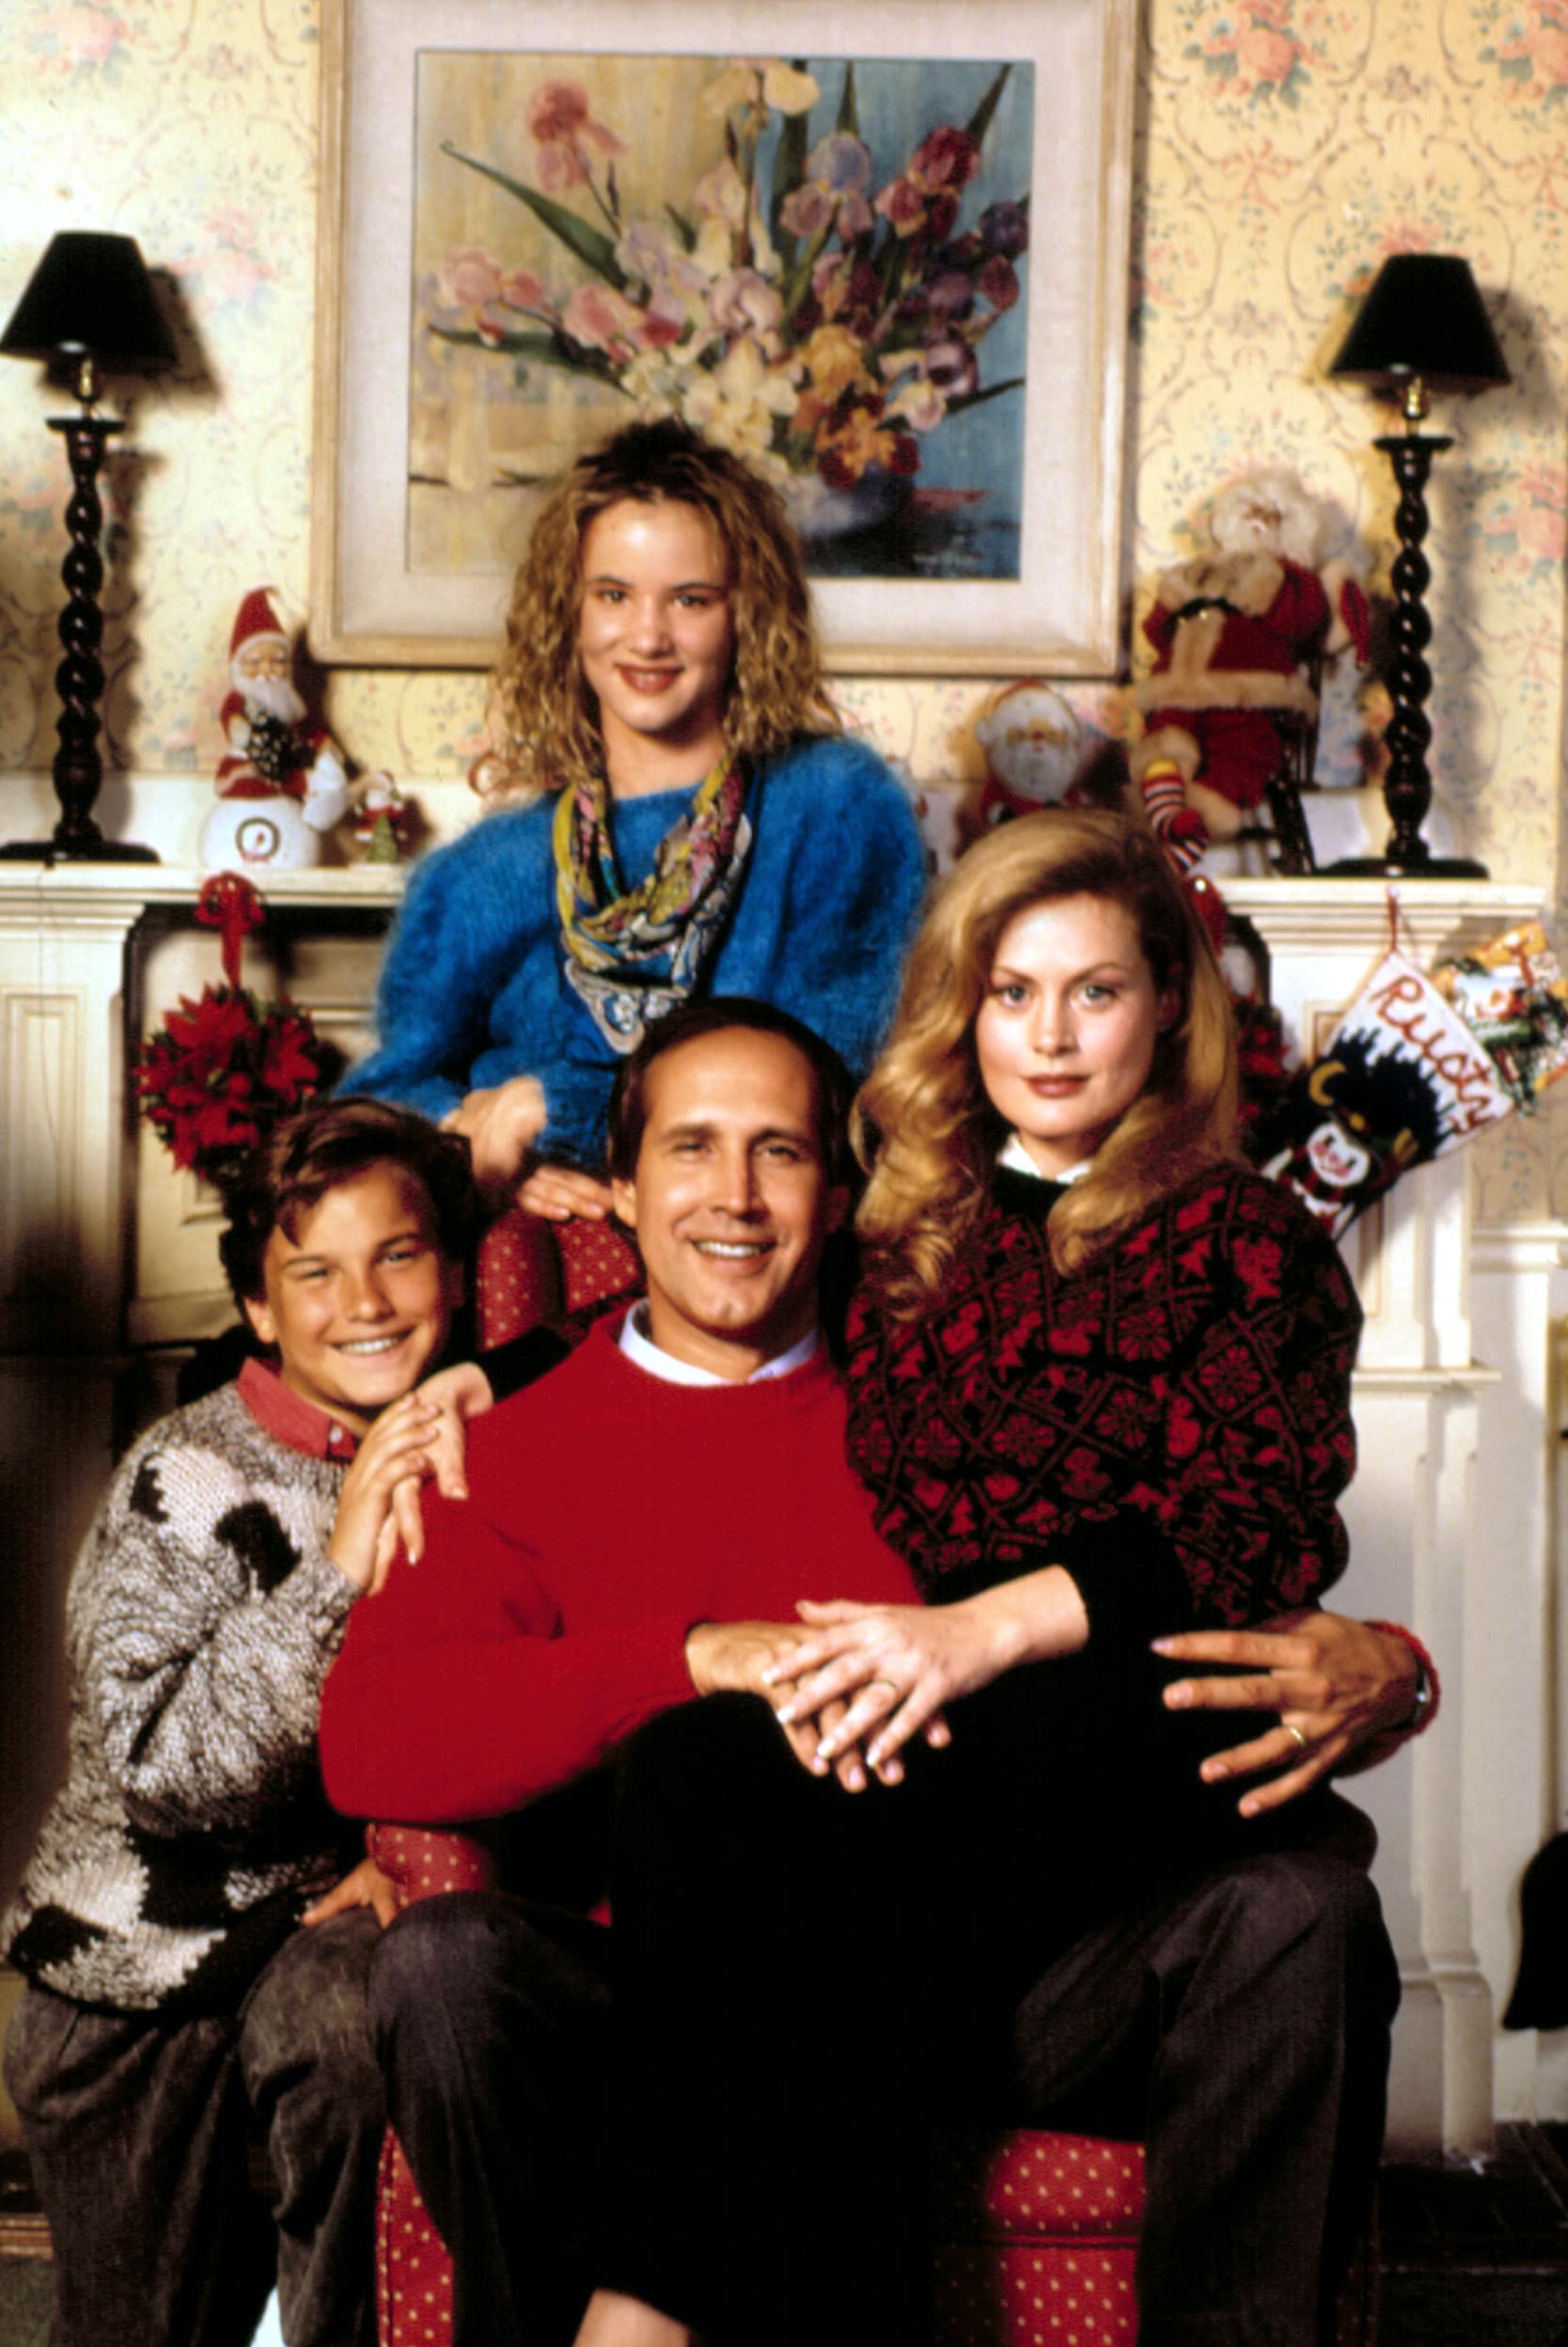 NATIONAL LAMPOON'S CHRISTMAS VACATION, Johnny Galecki, Juliette Lewis, Chevy Chase, Beverly D'Angelo, 1989 